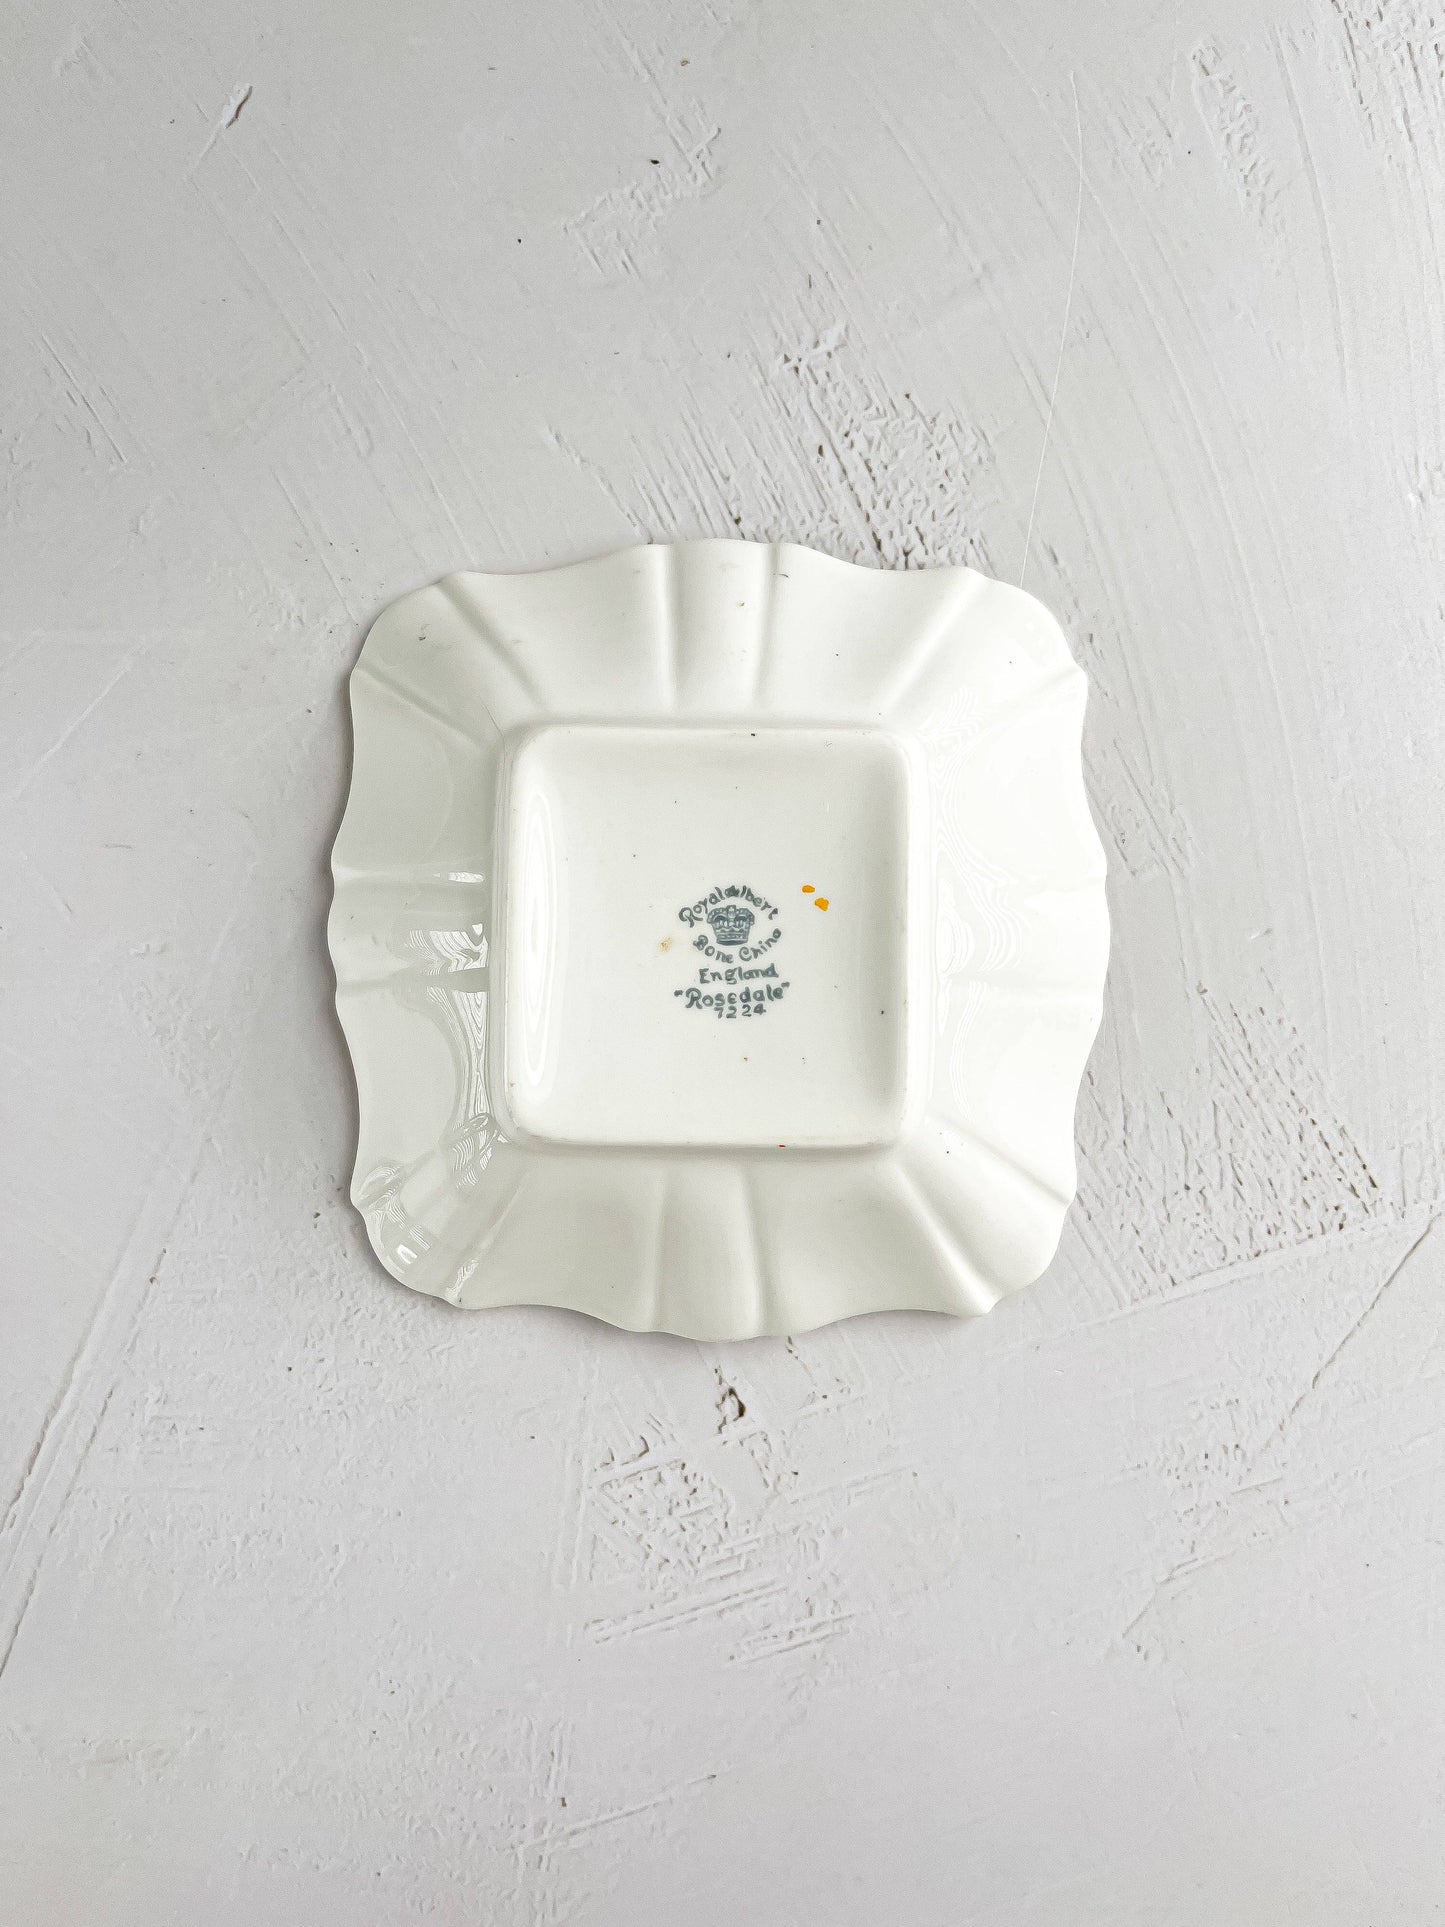 Royal Albert Square Sweet Meat/Candy Dish - ‘Rosedale’ Collection - SOSC Home